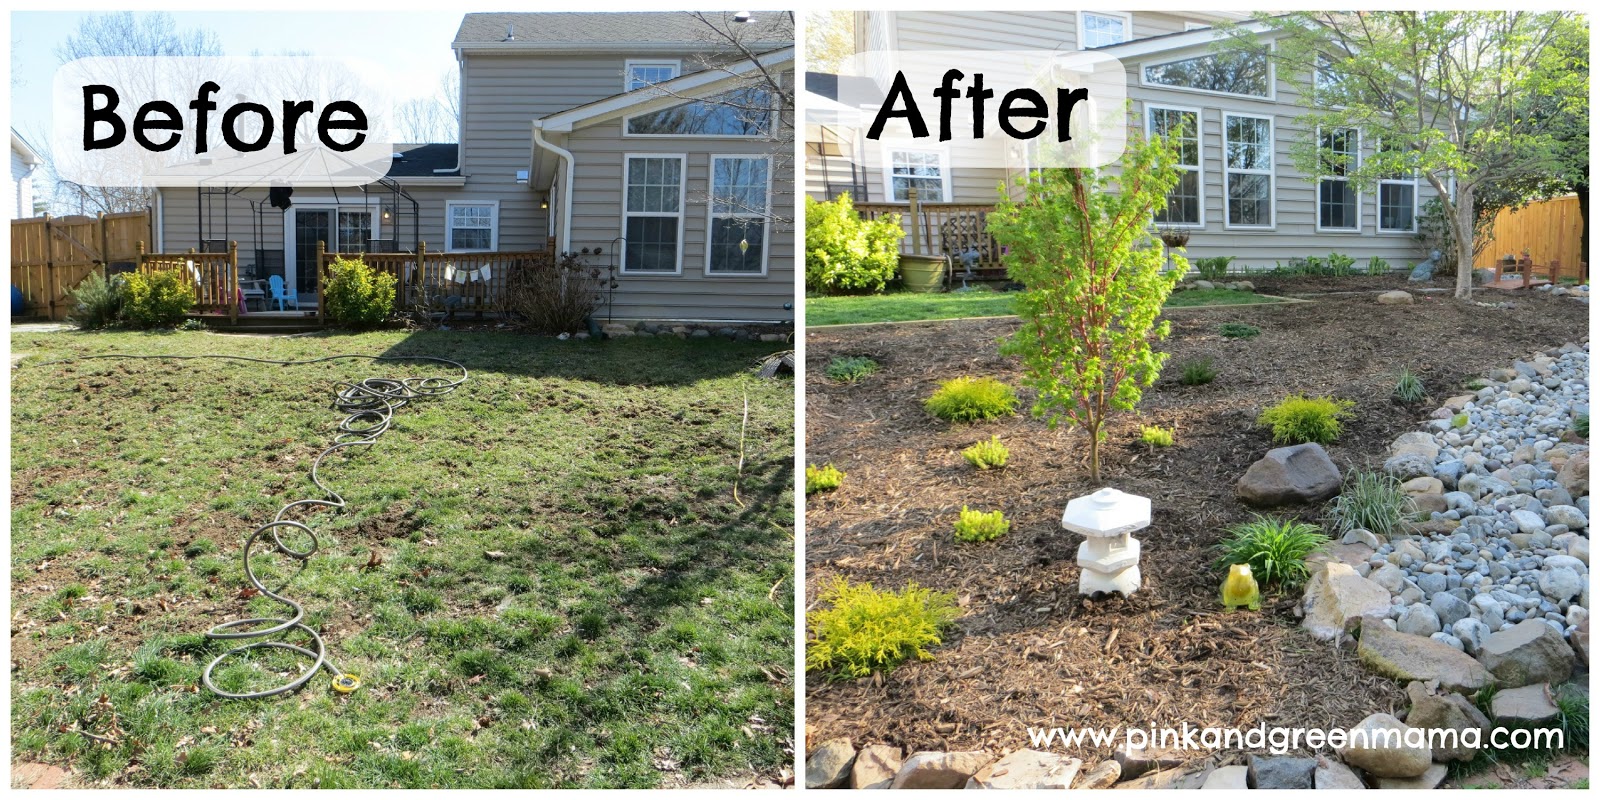 Before and After DIY Backyard Makeover on a Budget from Pink and Green ...